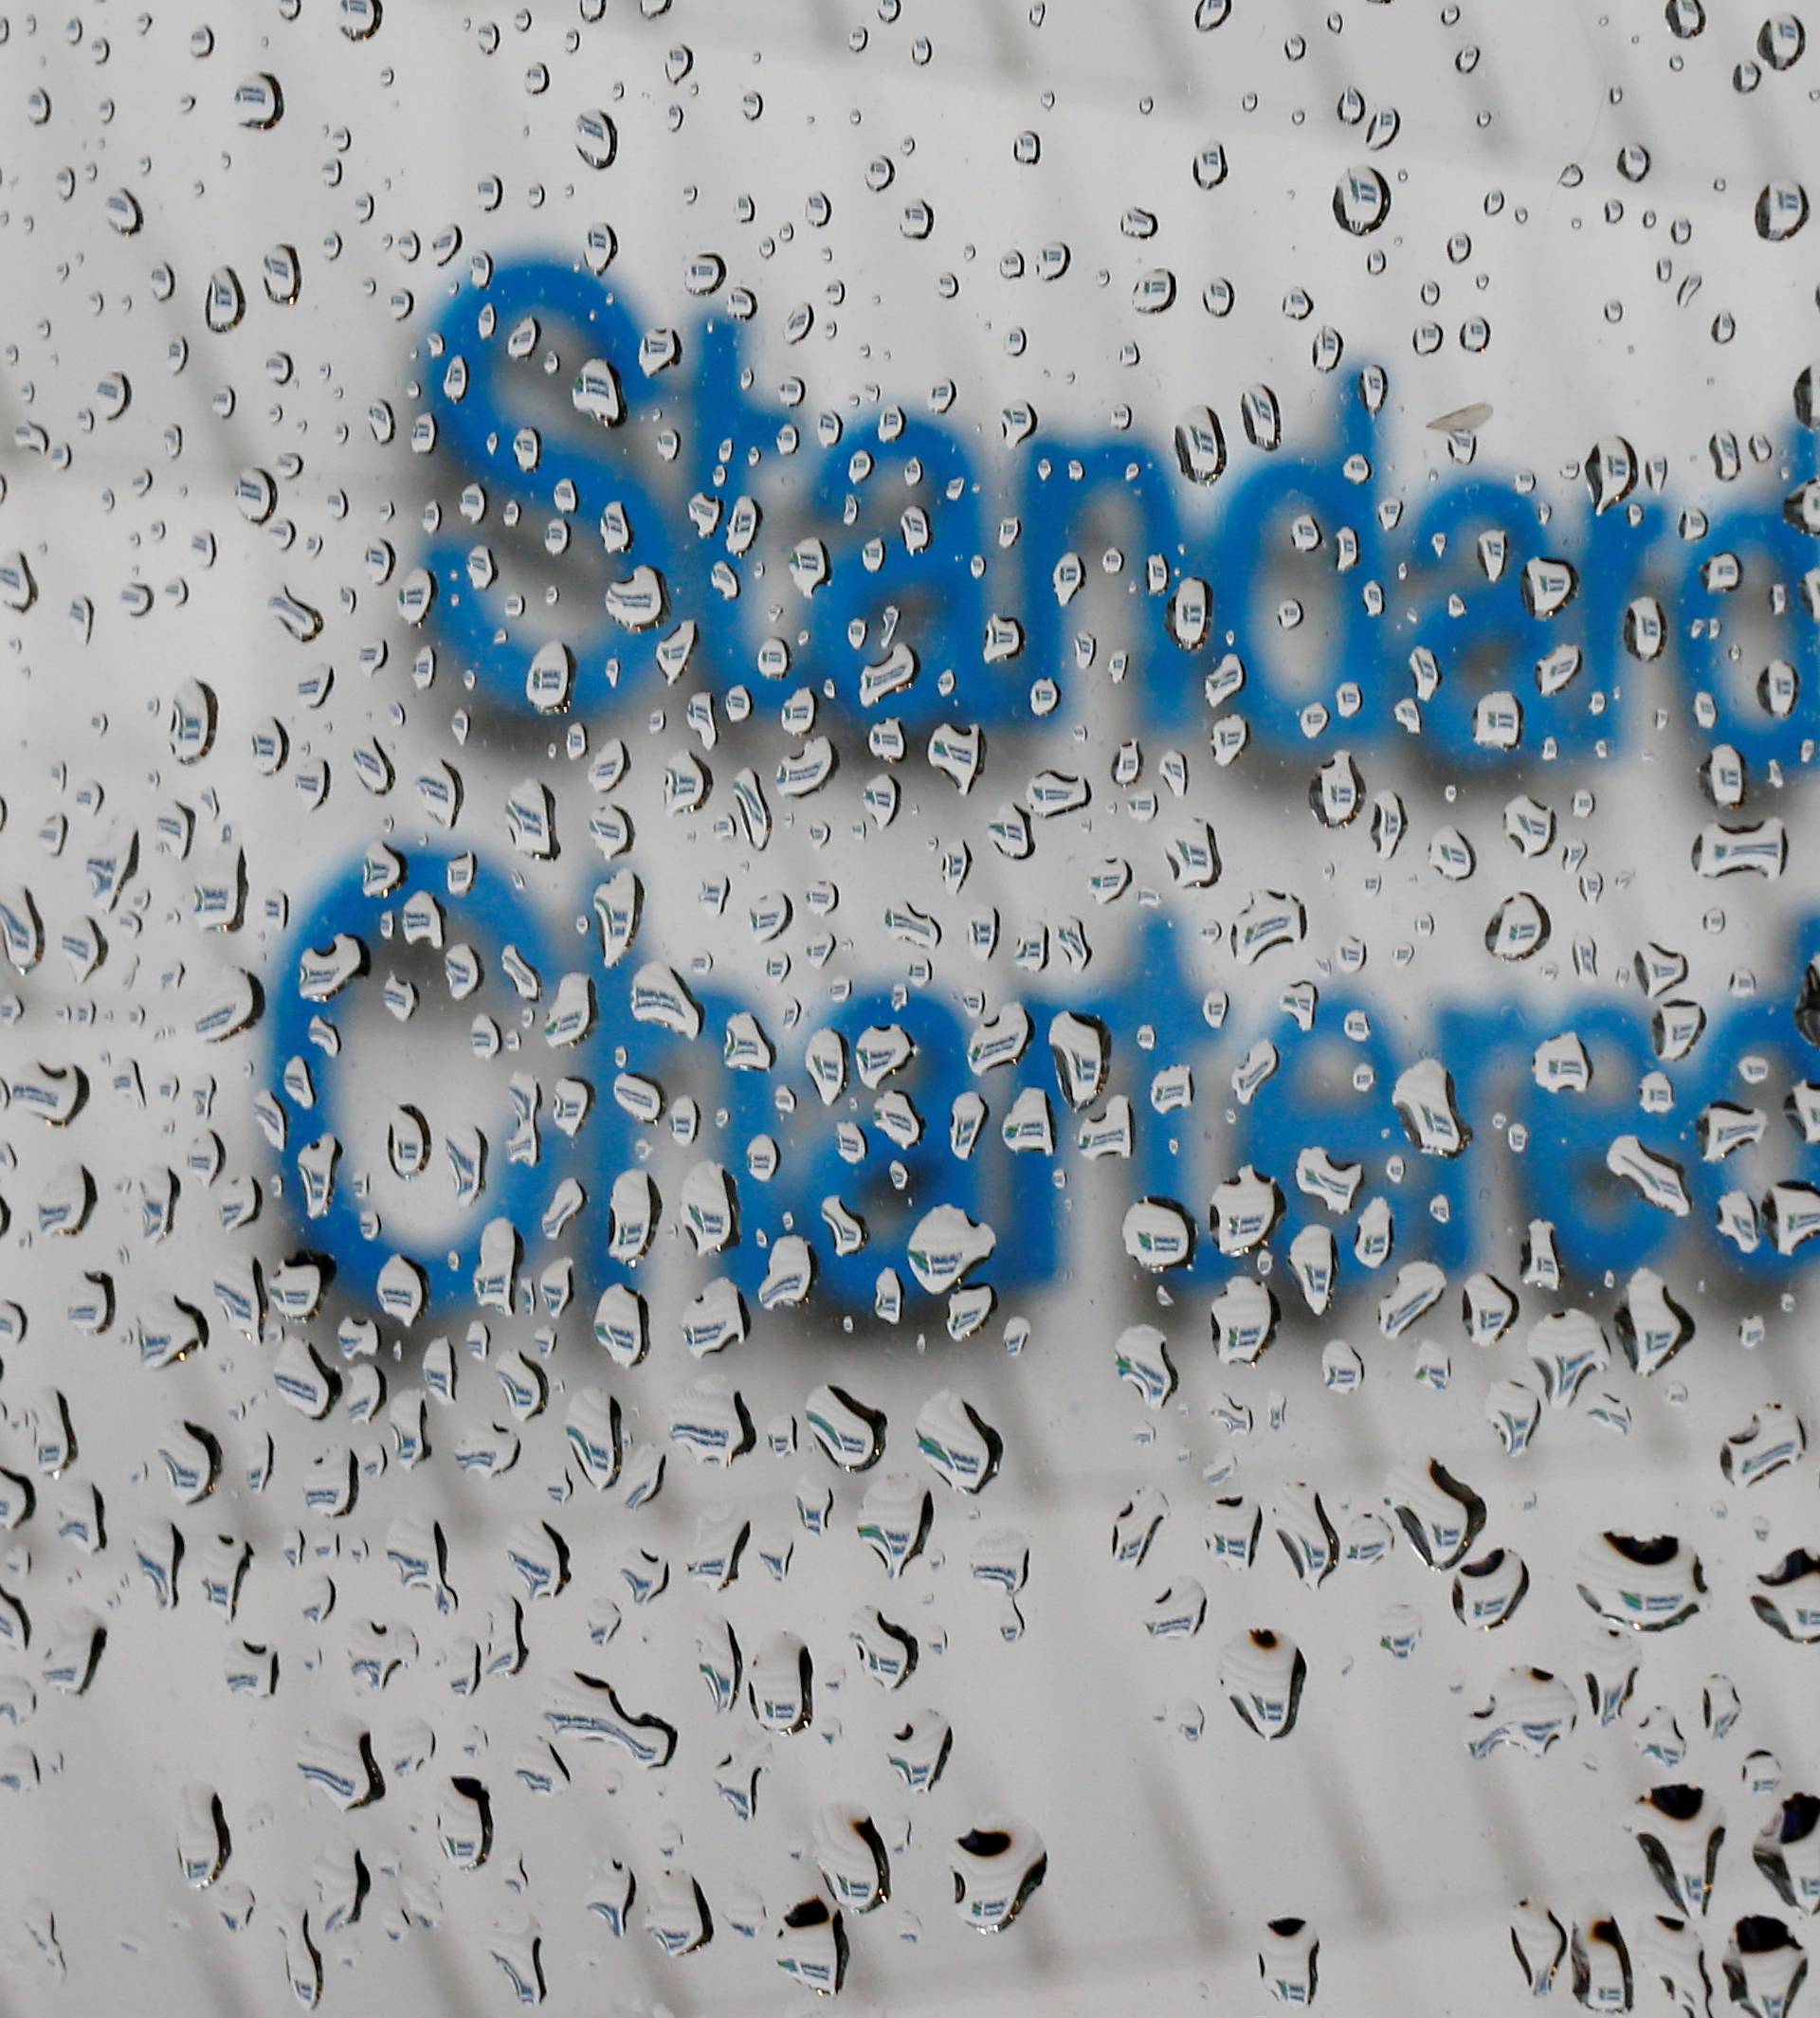 A Standard Chartered logo at its headquarters is seen through a window with raindrops, in Hong Kong